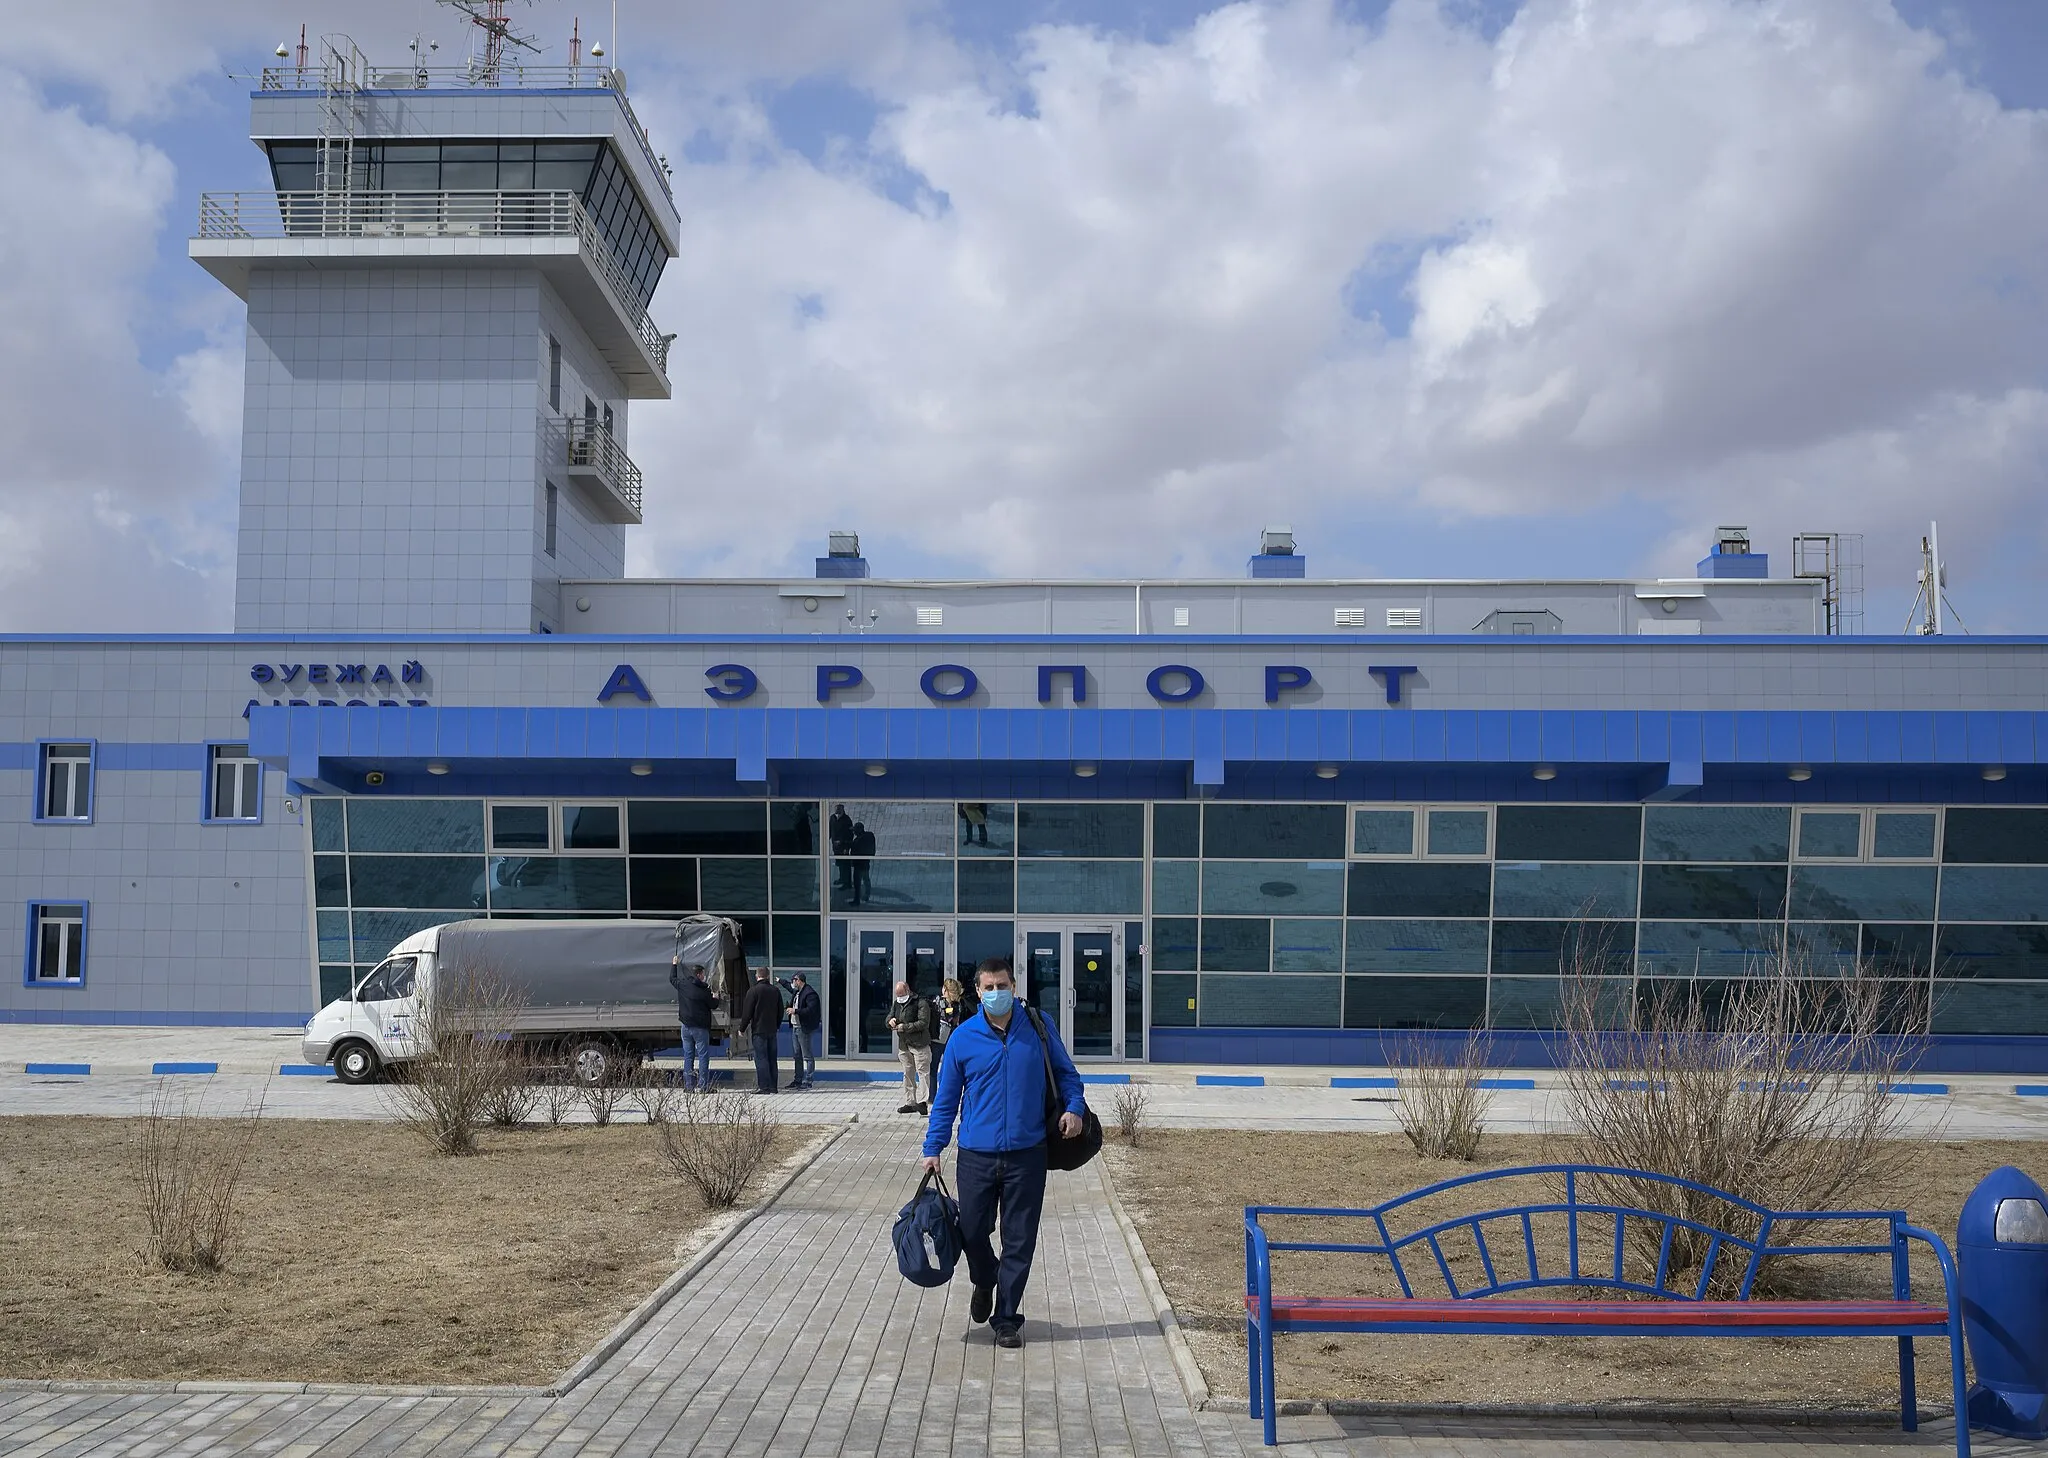 Photo showing: NASA ISS Program Manager Joel Montalbano and other NASA team members arrive at the Krayniy Airport in Baikonur, Kazakhstan in advance of the launch of Expedition 65 crewmembers Mark Vande Hei of NASA, Pyotr Dubrov and Oleg Novitskiy of Roscosmos, Monday, April 5, 2021. Vande Hei, Dubrov, and Novitskiy are scheduled to launch aboard their Soyuz MS-18 spacecraft on April 9. Photo Credit: (NASA/Bill Ingalls)